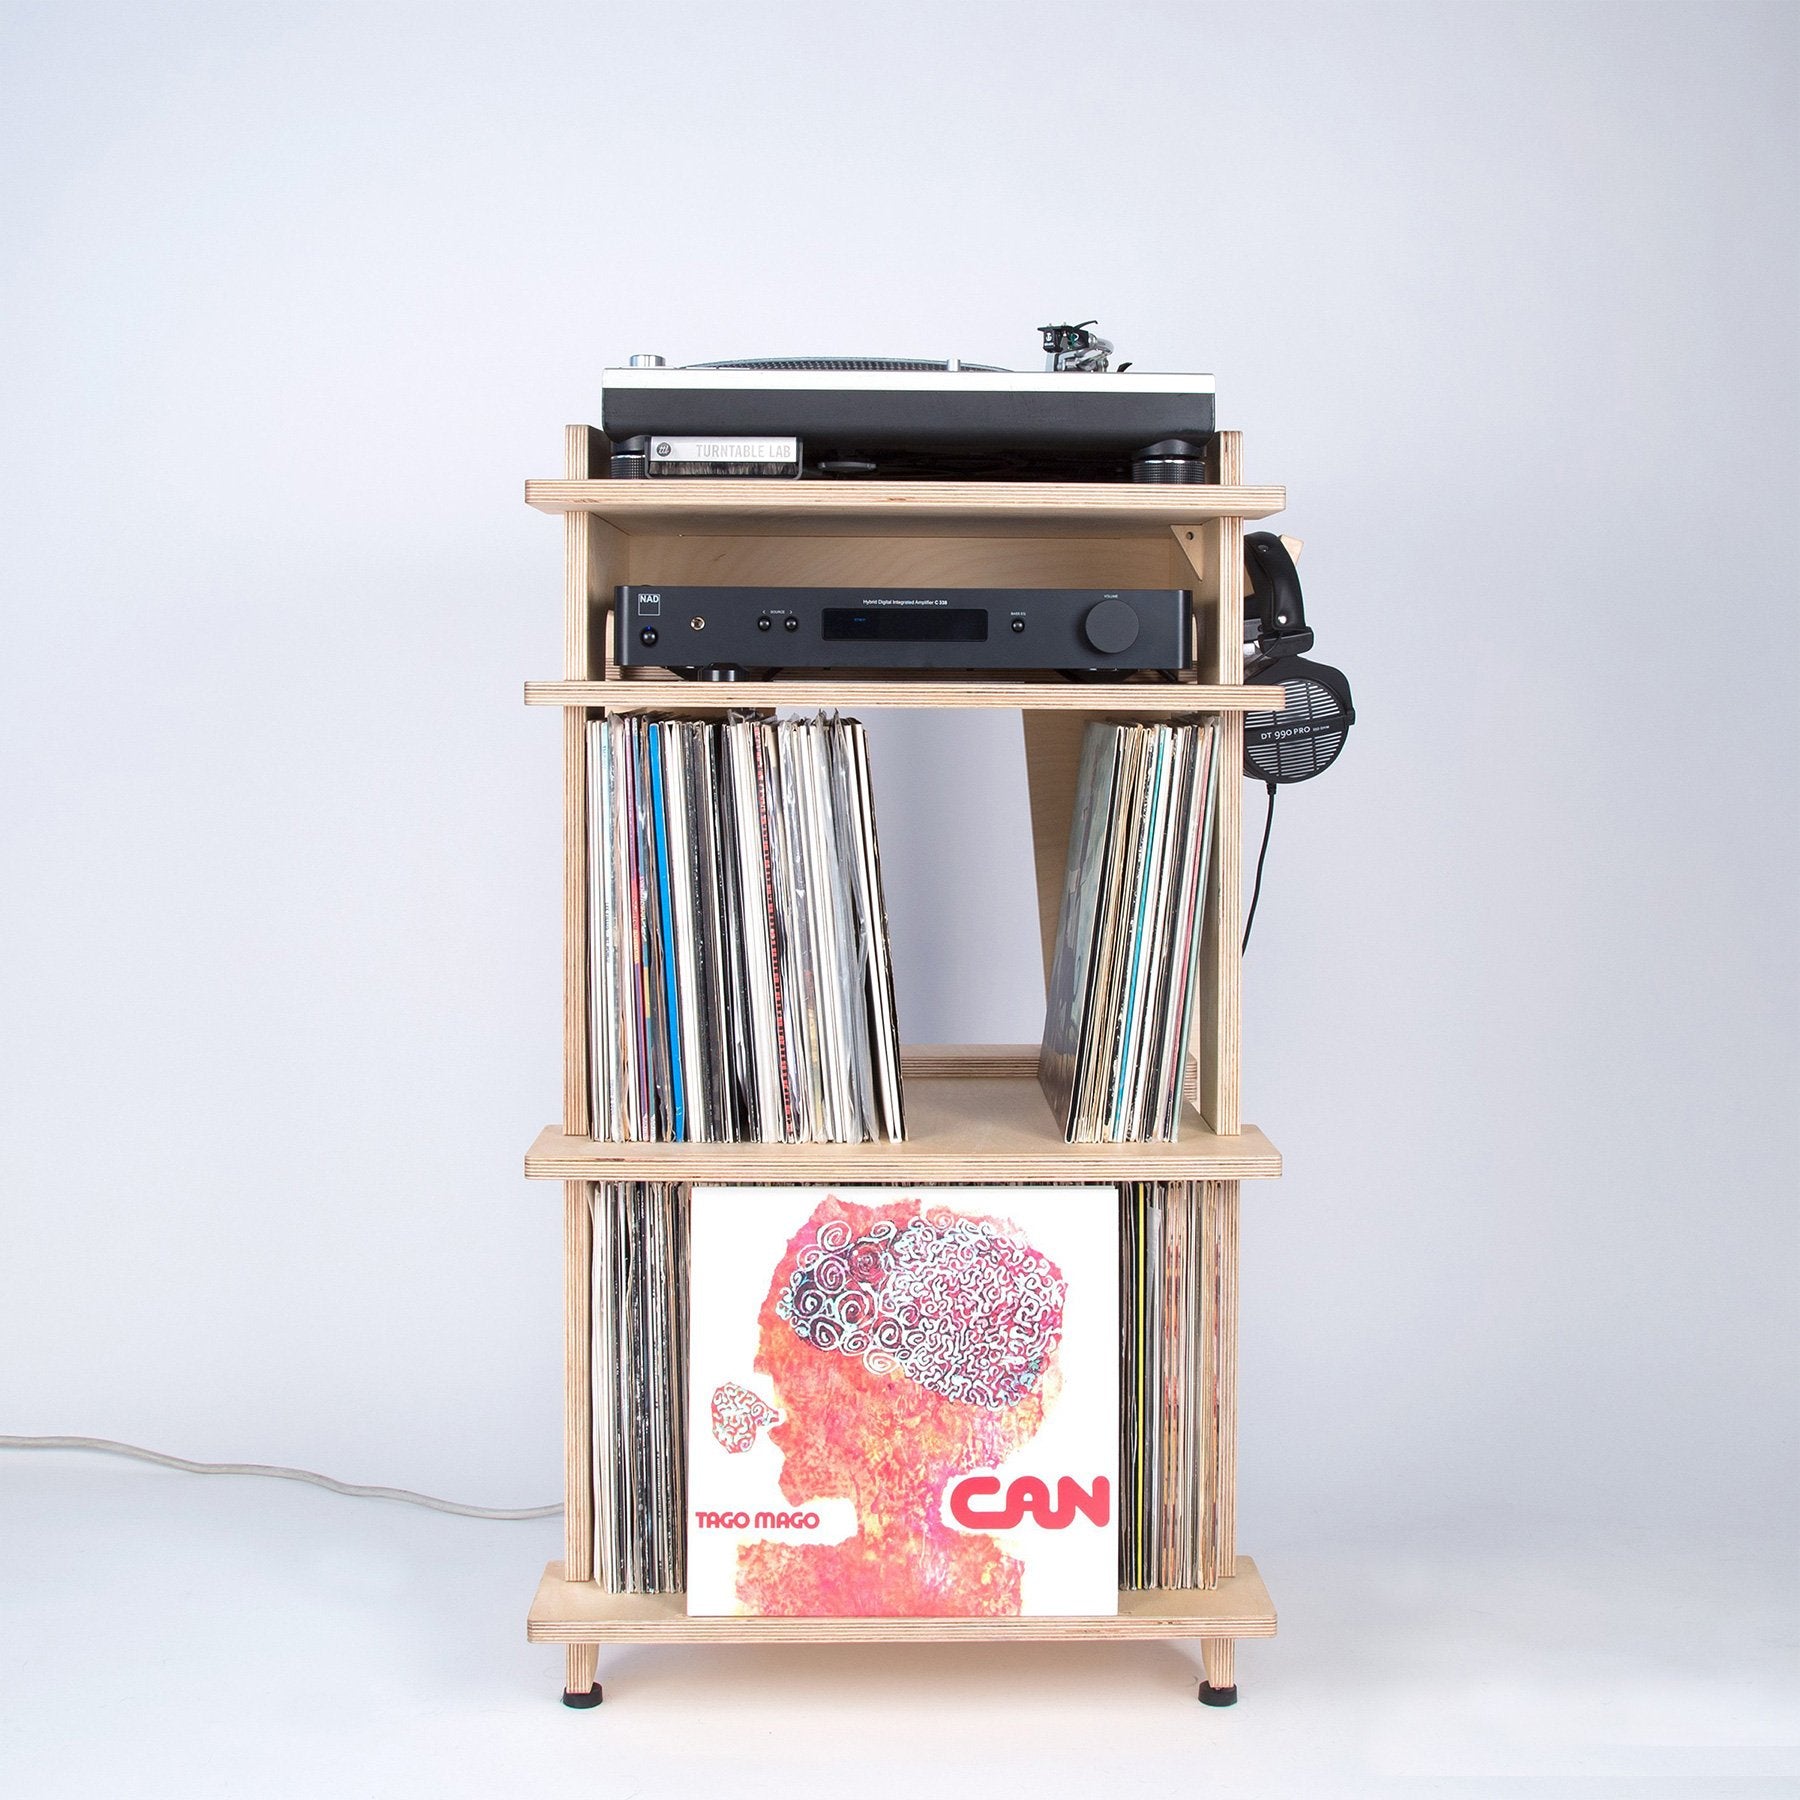 Line Phono: Turntable Station Turntable Stand + Vinyl Storage, Made In the USA